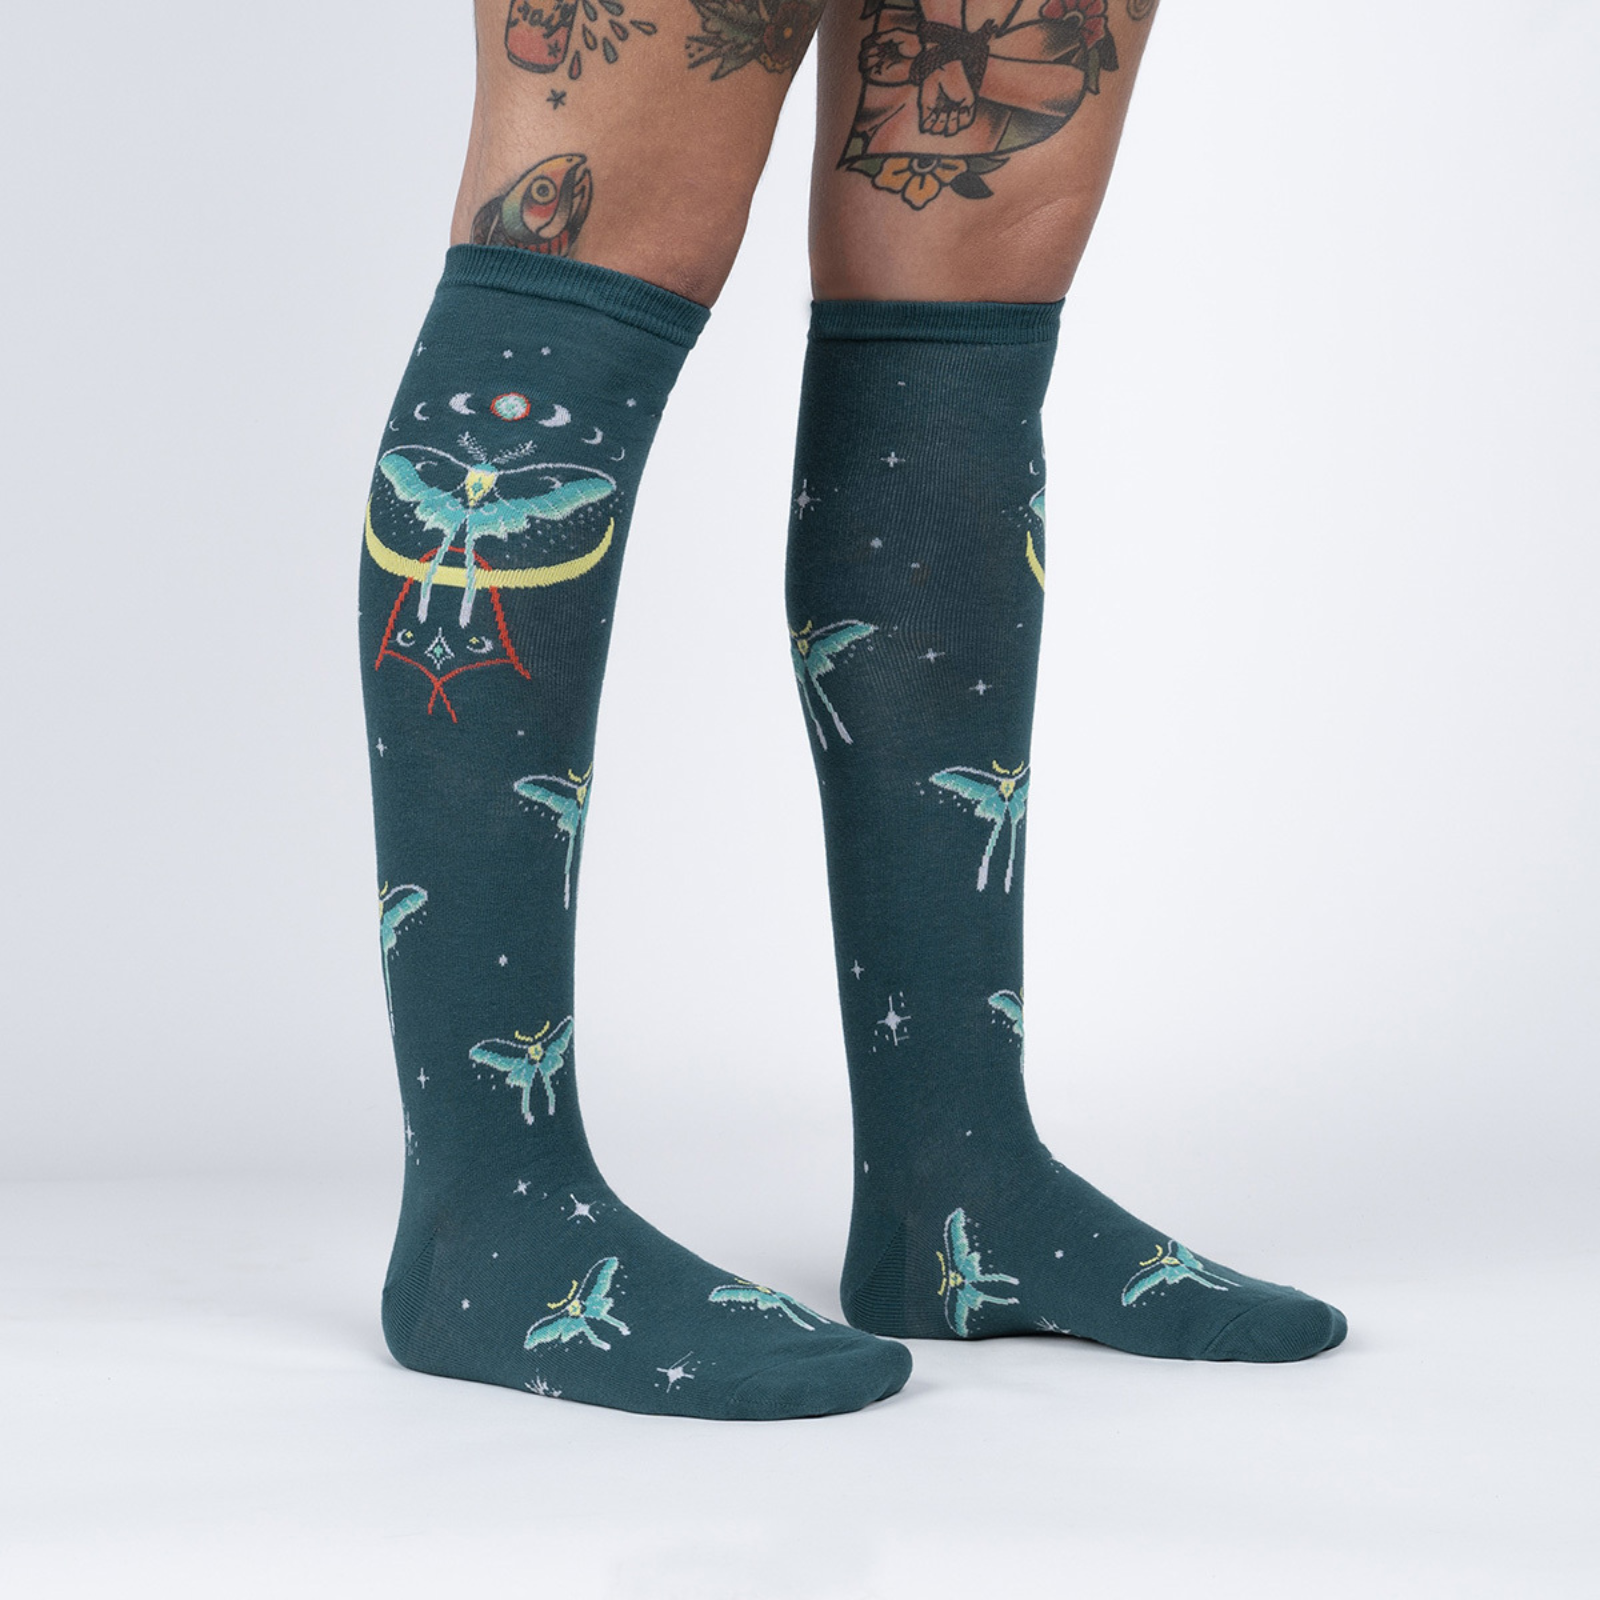 Sock It To Me Mystic Moth women's sock (GLOWS IN THE DARK!) featuring teal knee high with moths all over worn by model 